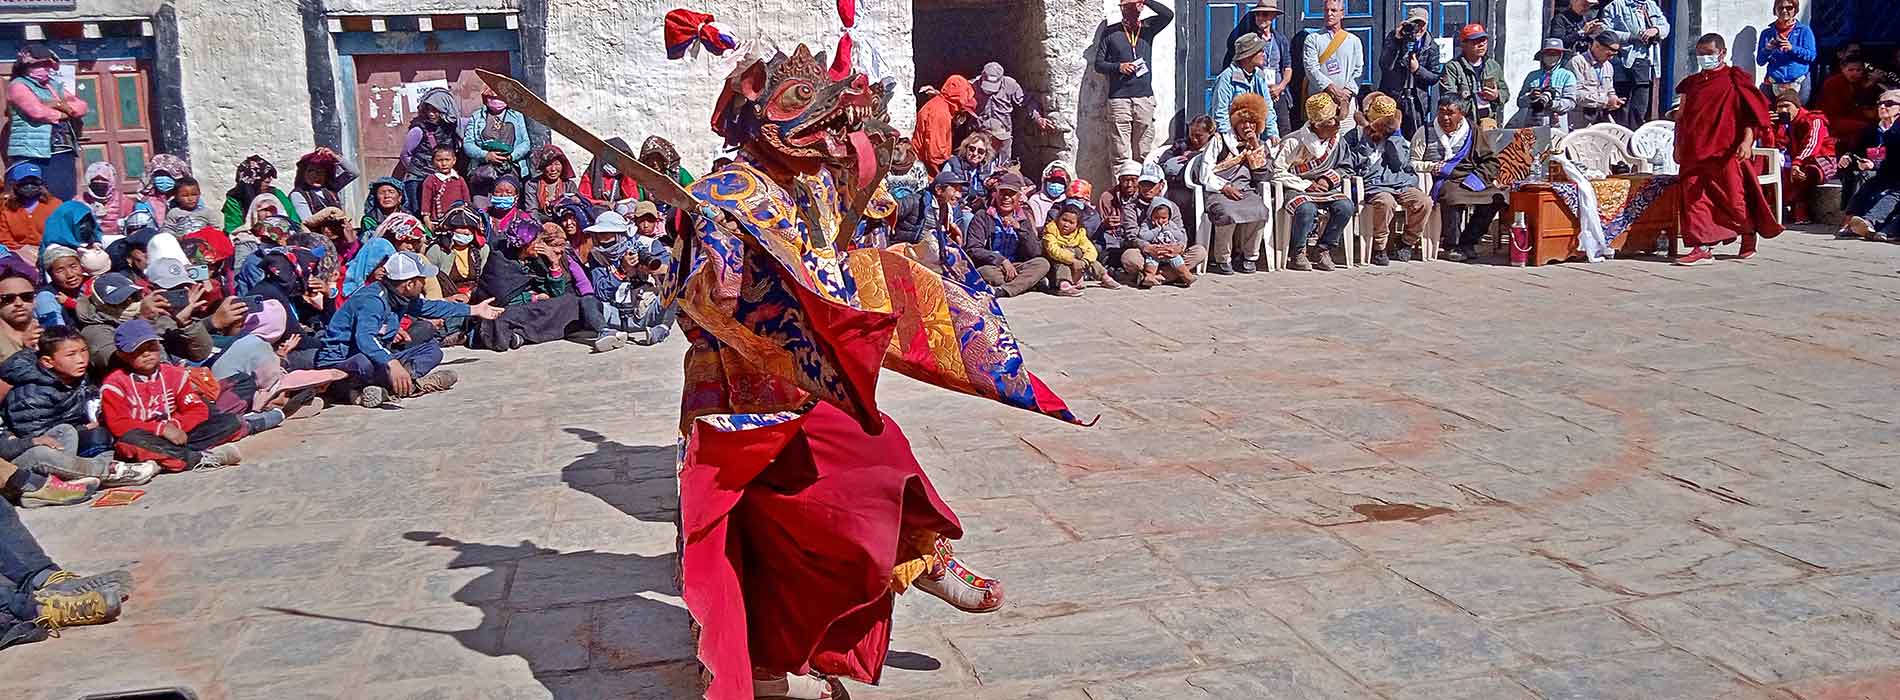 Tiji Festival: A Cultural Celebration in the Heart of Mustang